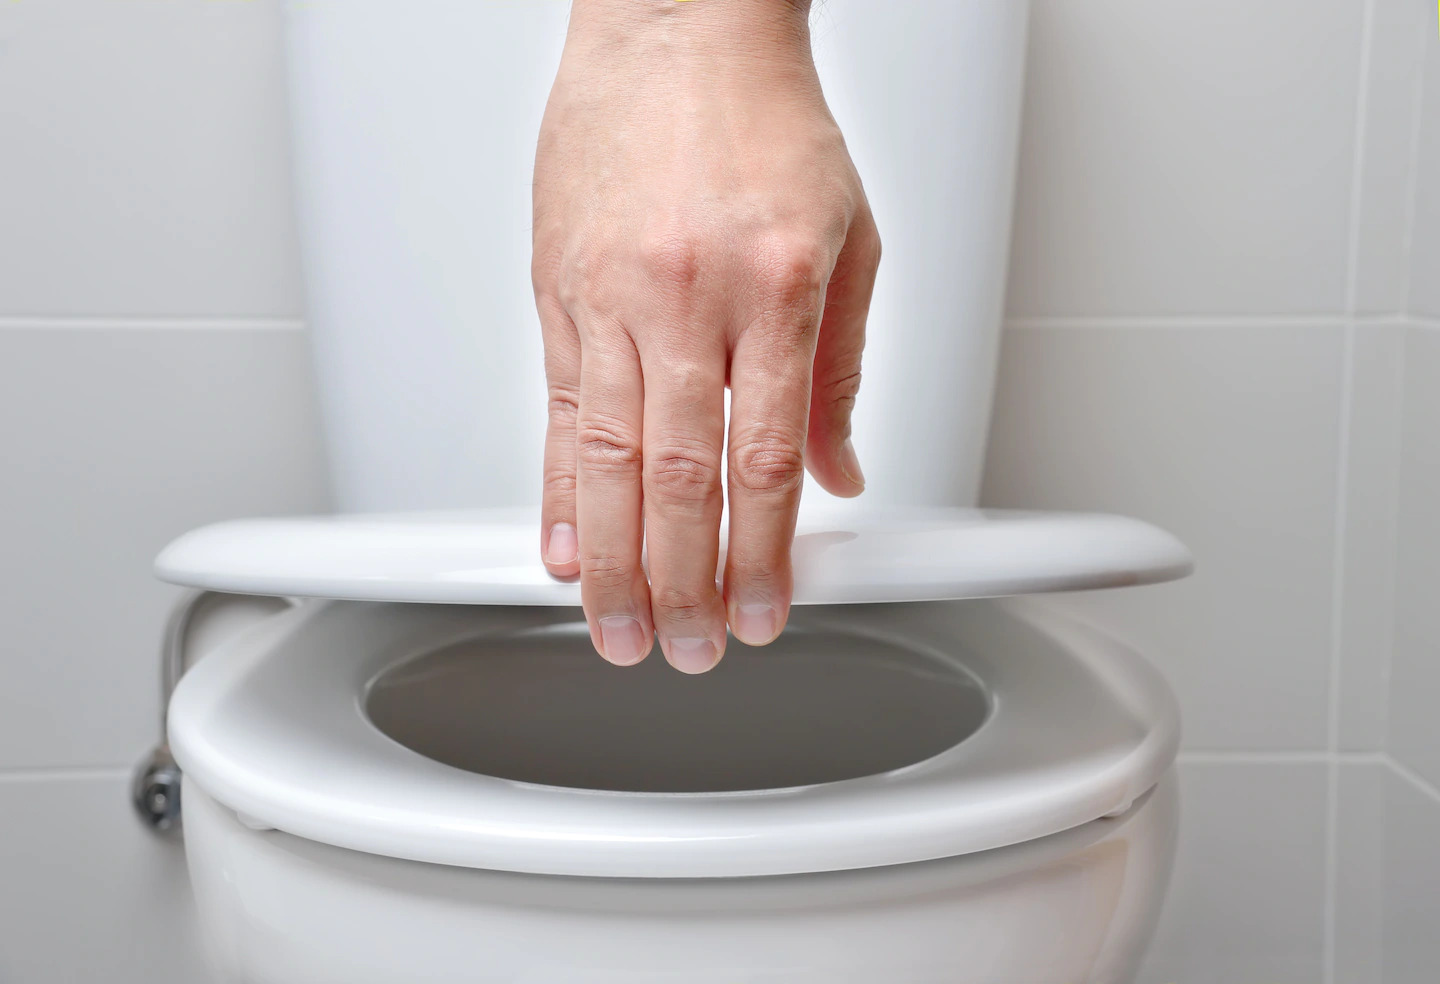 What Would Happen if Everyone in Seattle Flushed Their Toilets Simultaneously?